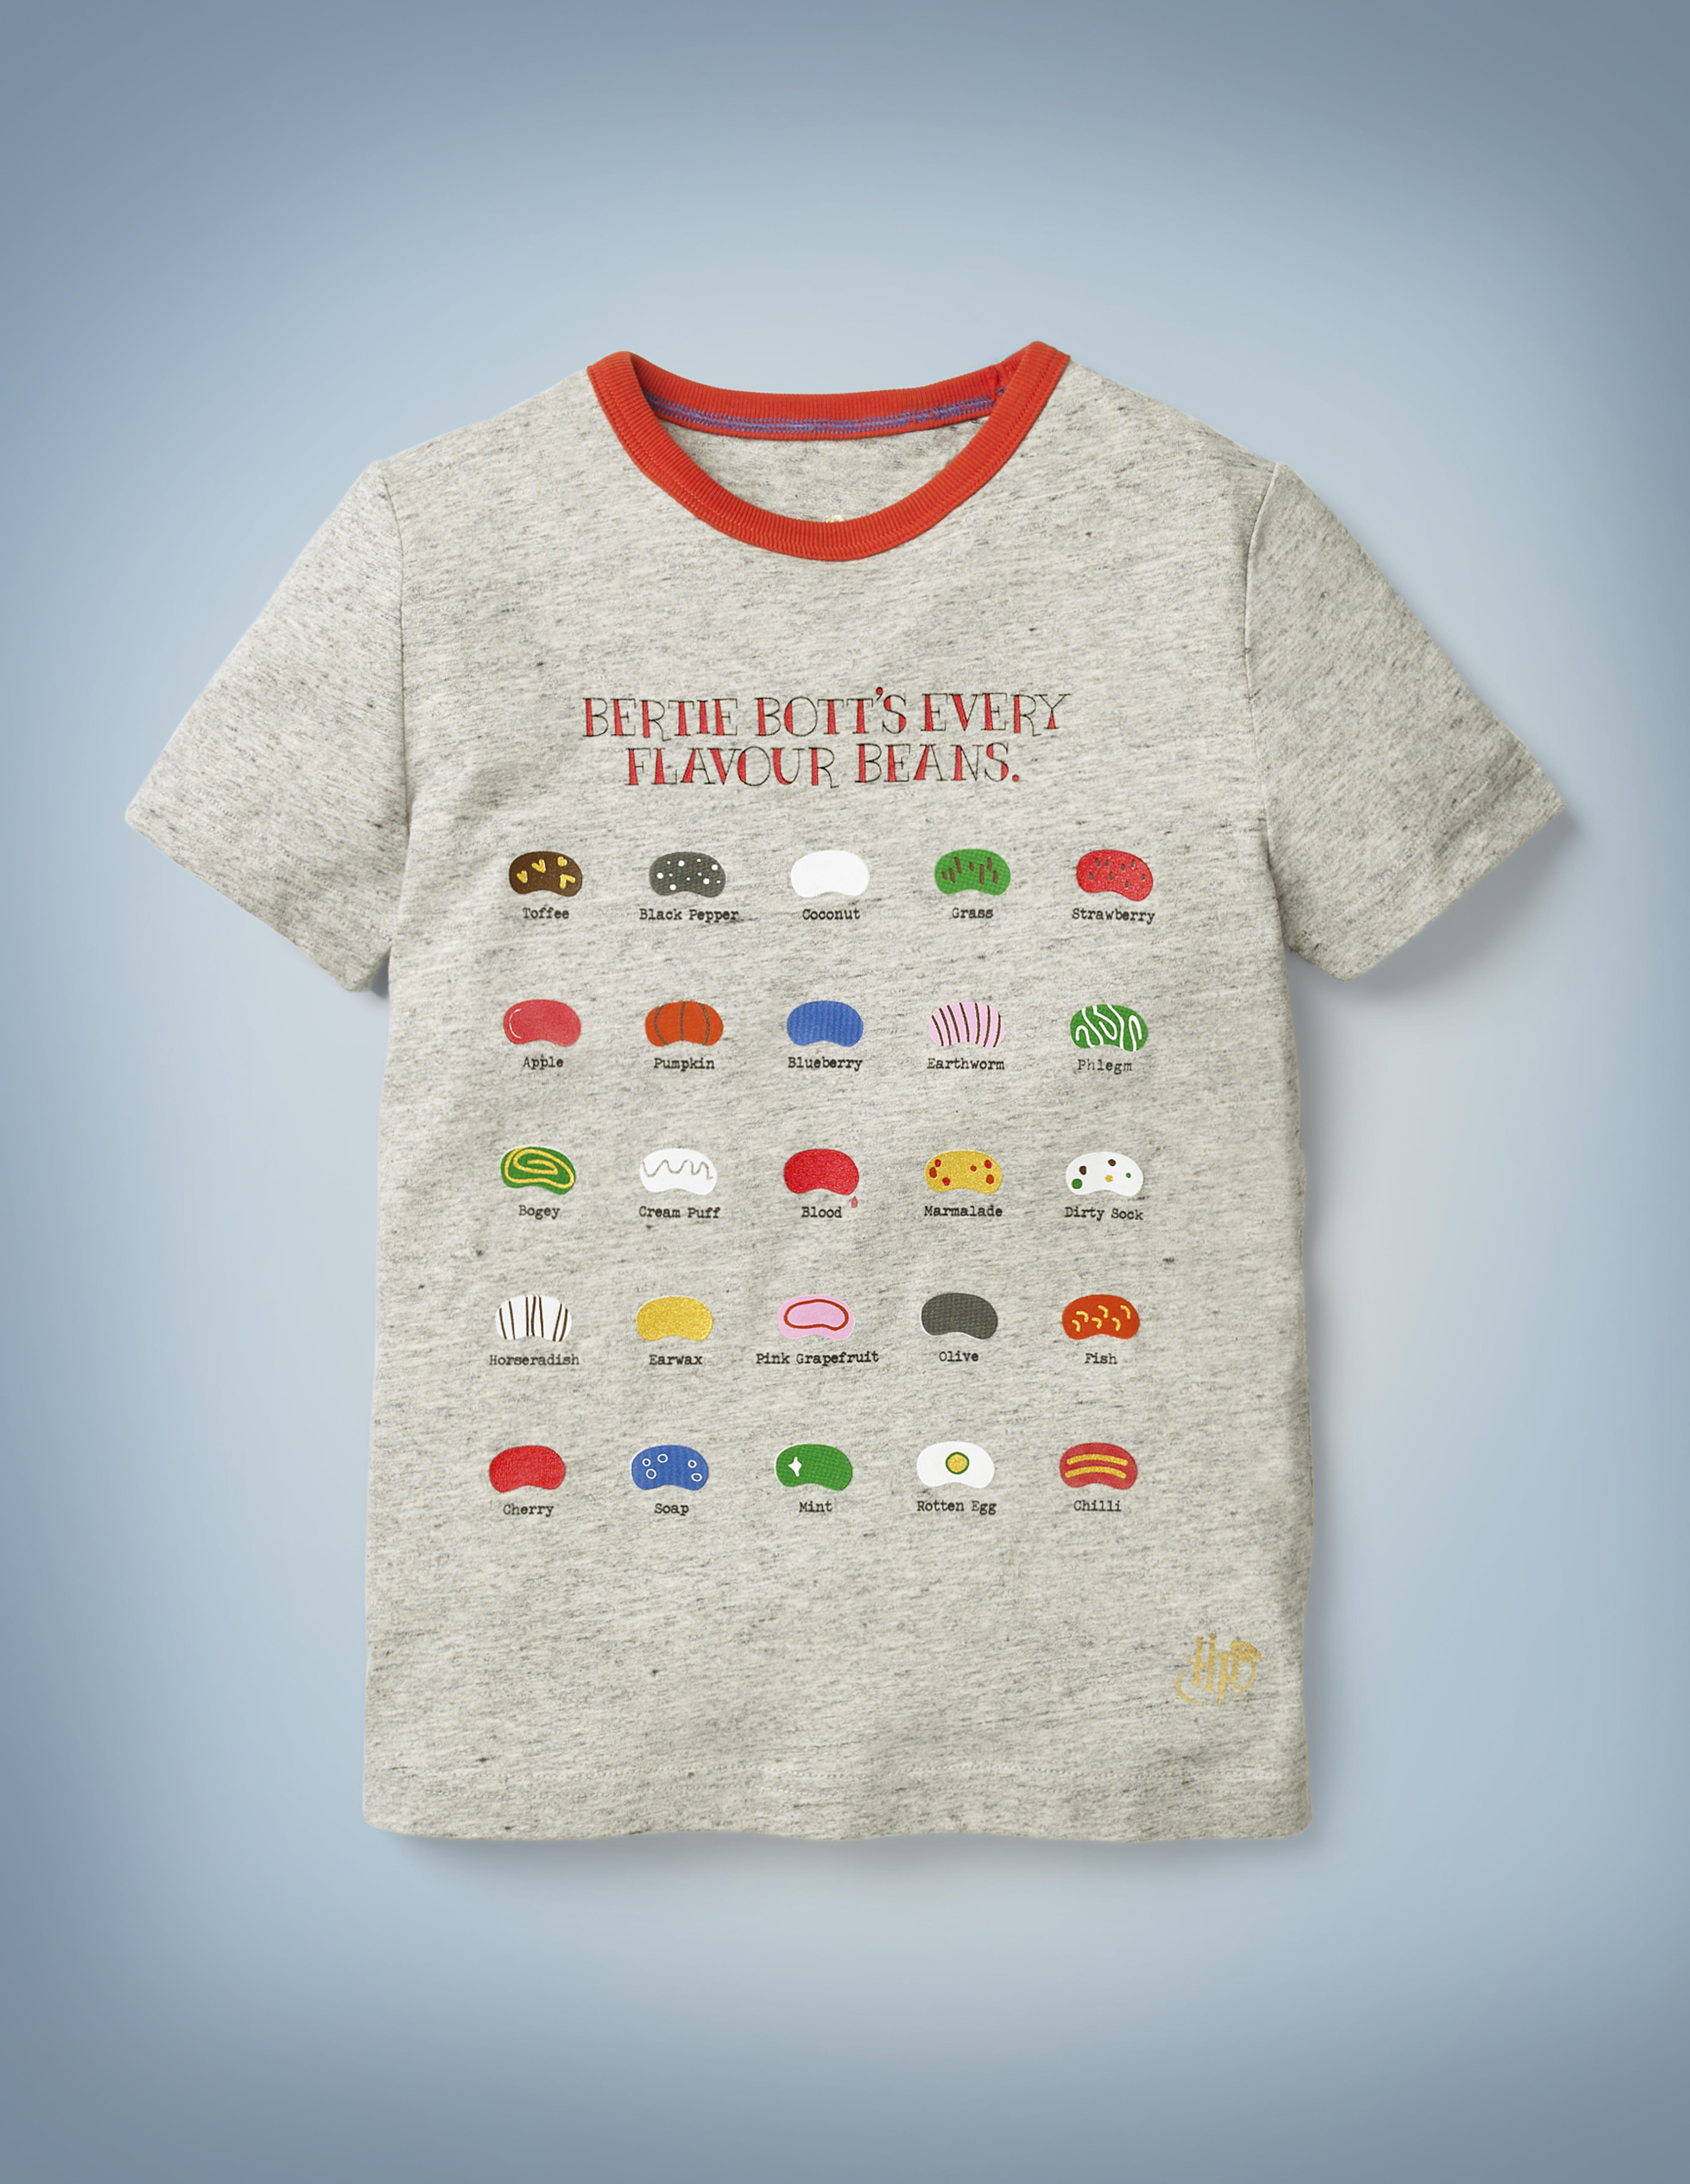 The Mini Boden Bertie Bott’s T-shirt in gray sports a graphic design featuring 25 different Bertie Bott’s Every Flavour Beans, from toffee to earwax. It retails at £18.